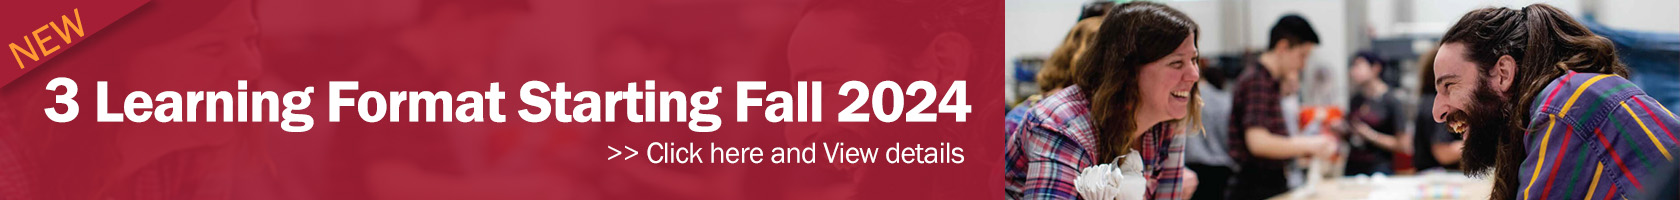 New 3 Learning Formats Starting Fall 2024